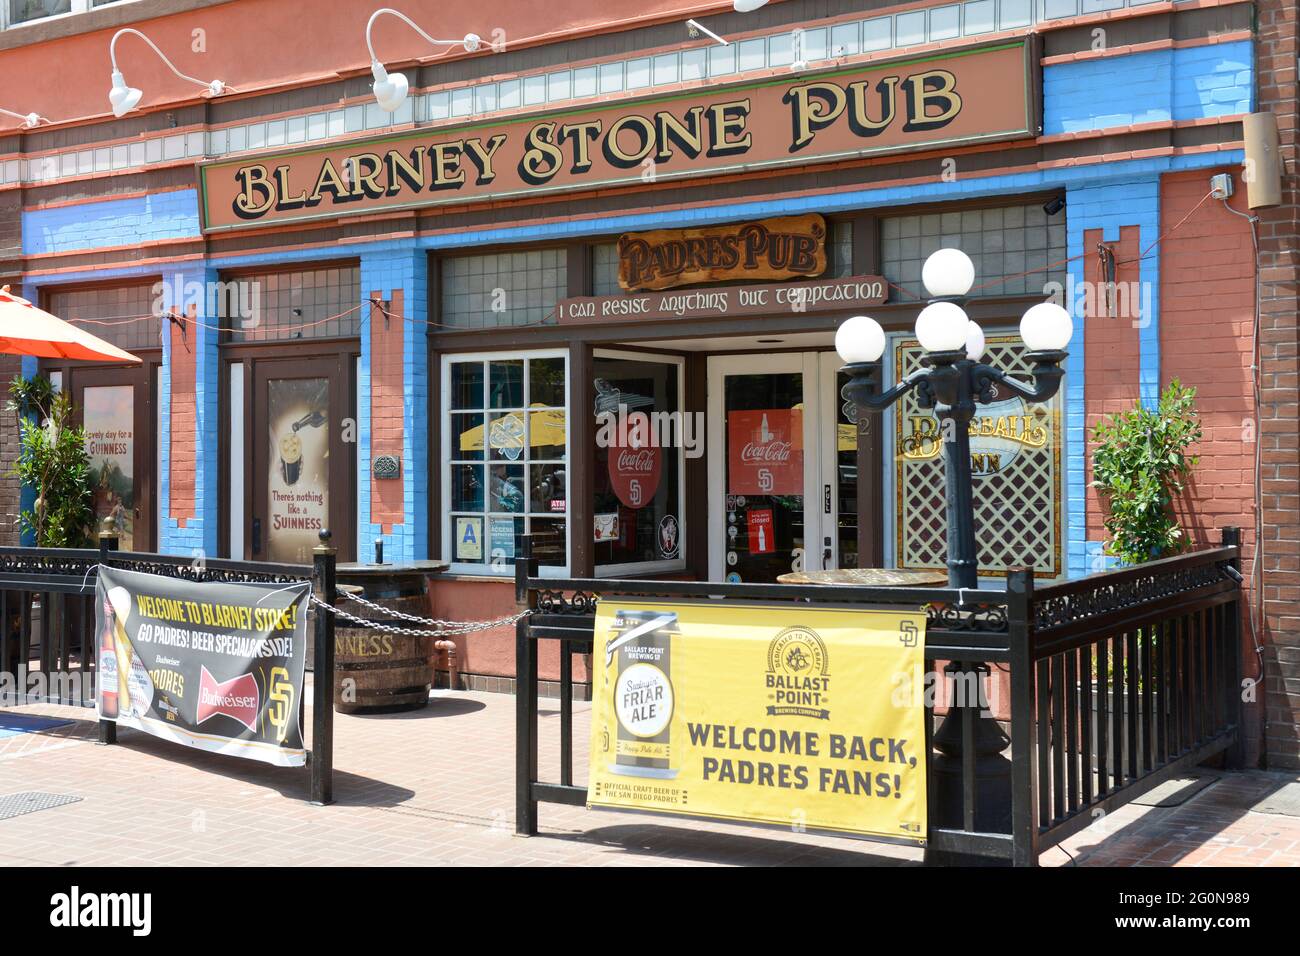 Outside the Blarney Stone Irish pub on Fifth Ave in the Gaslamp Quarter of San Diego, CA Stock Photo